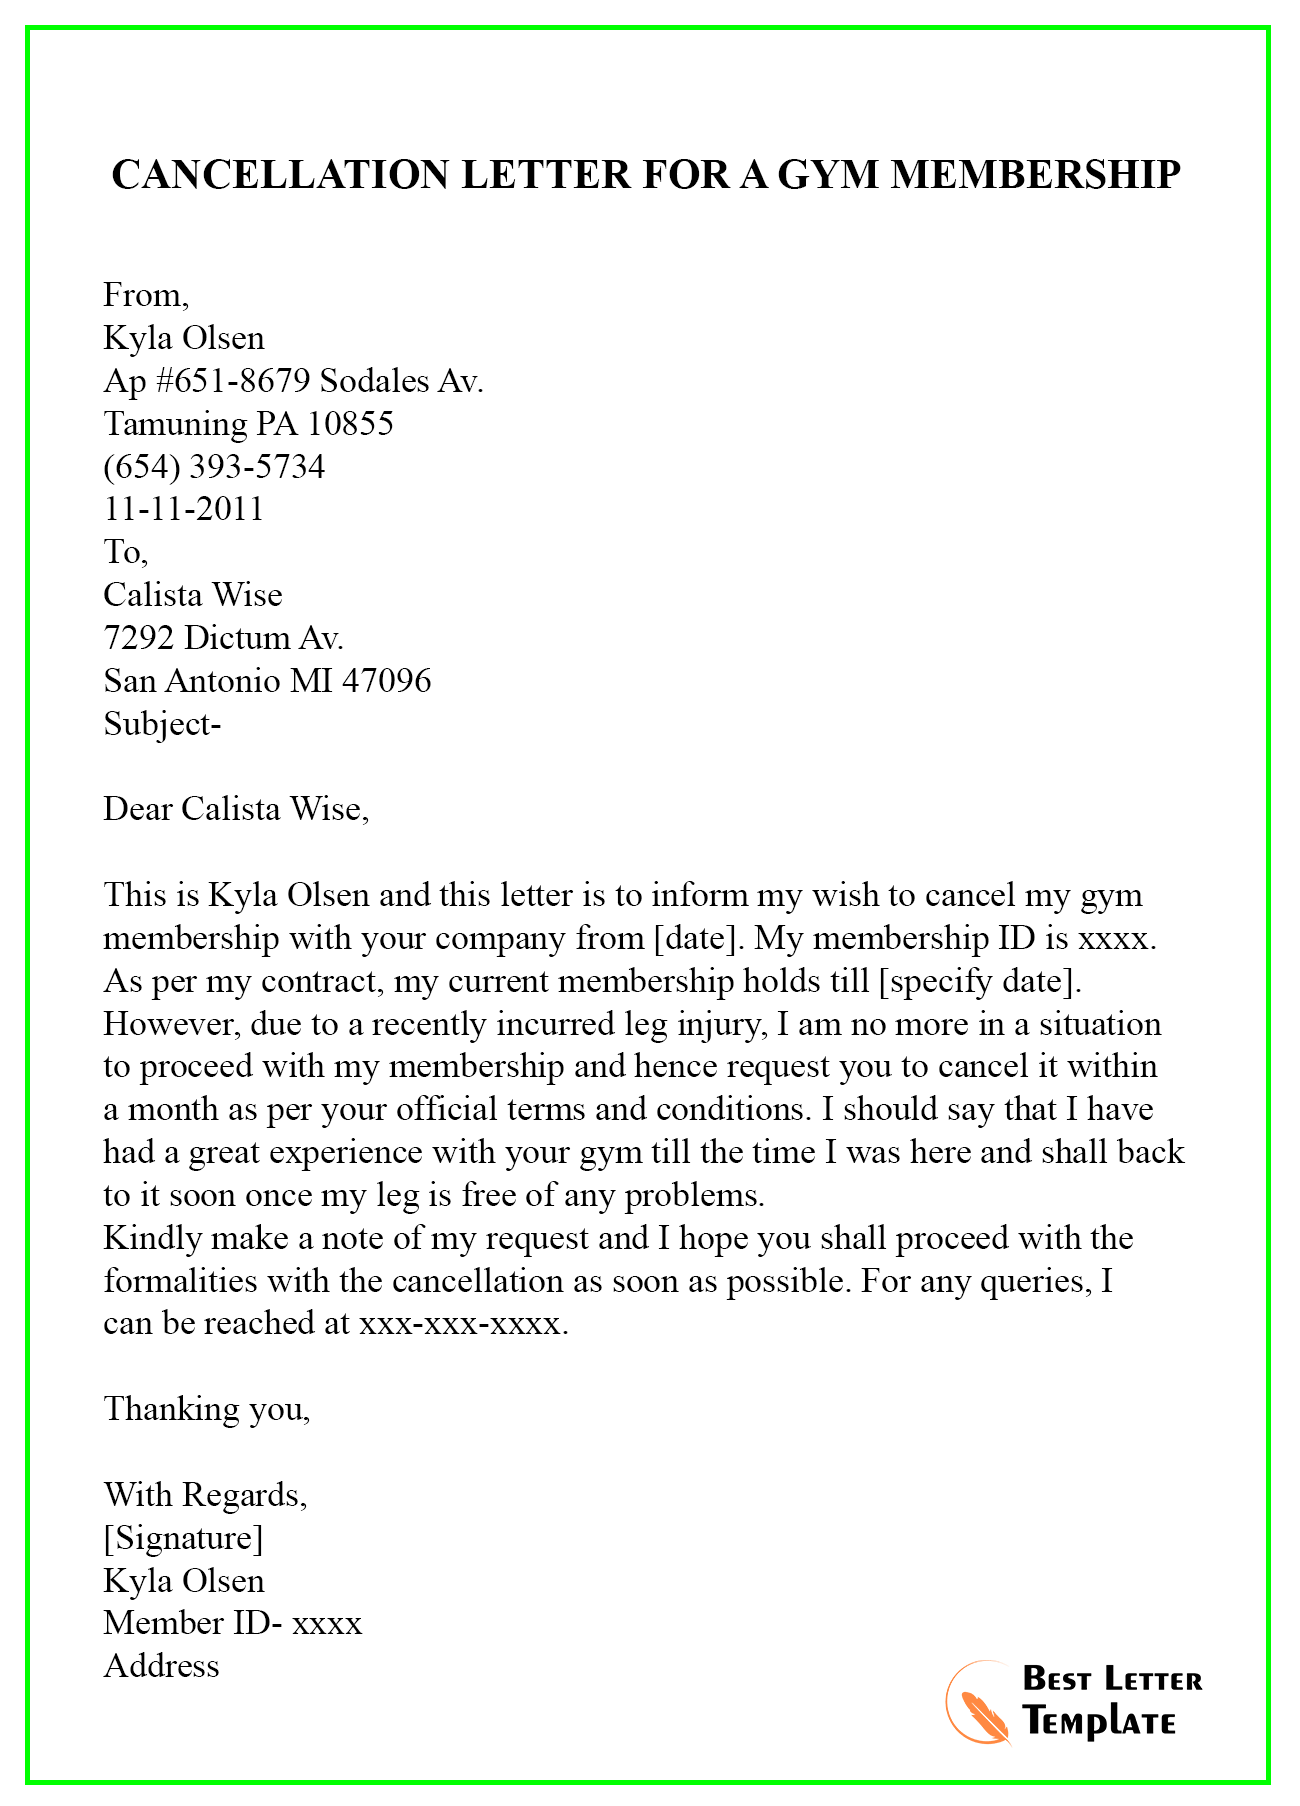 cancellation-letter-for-a-gym-membership-best-letter-template